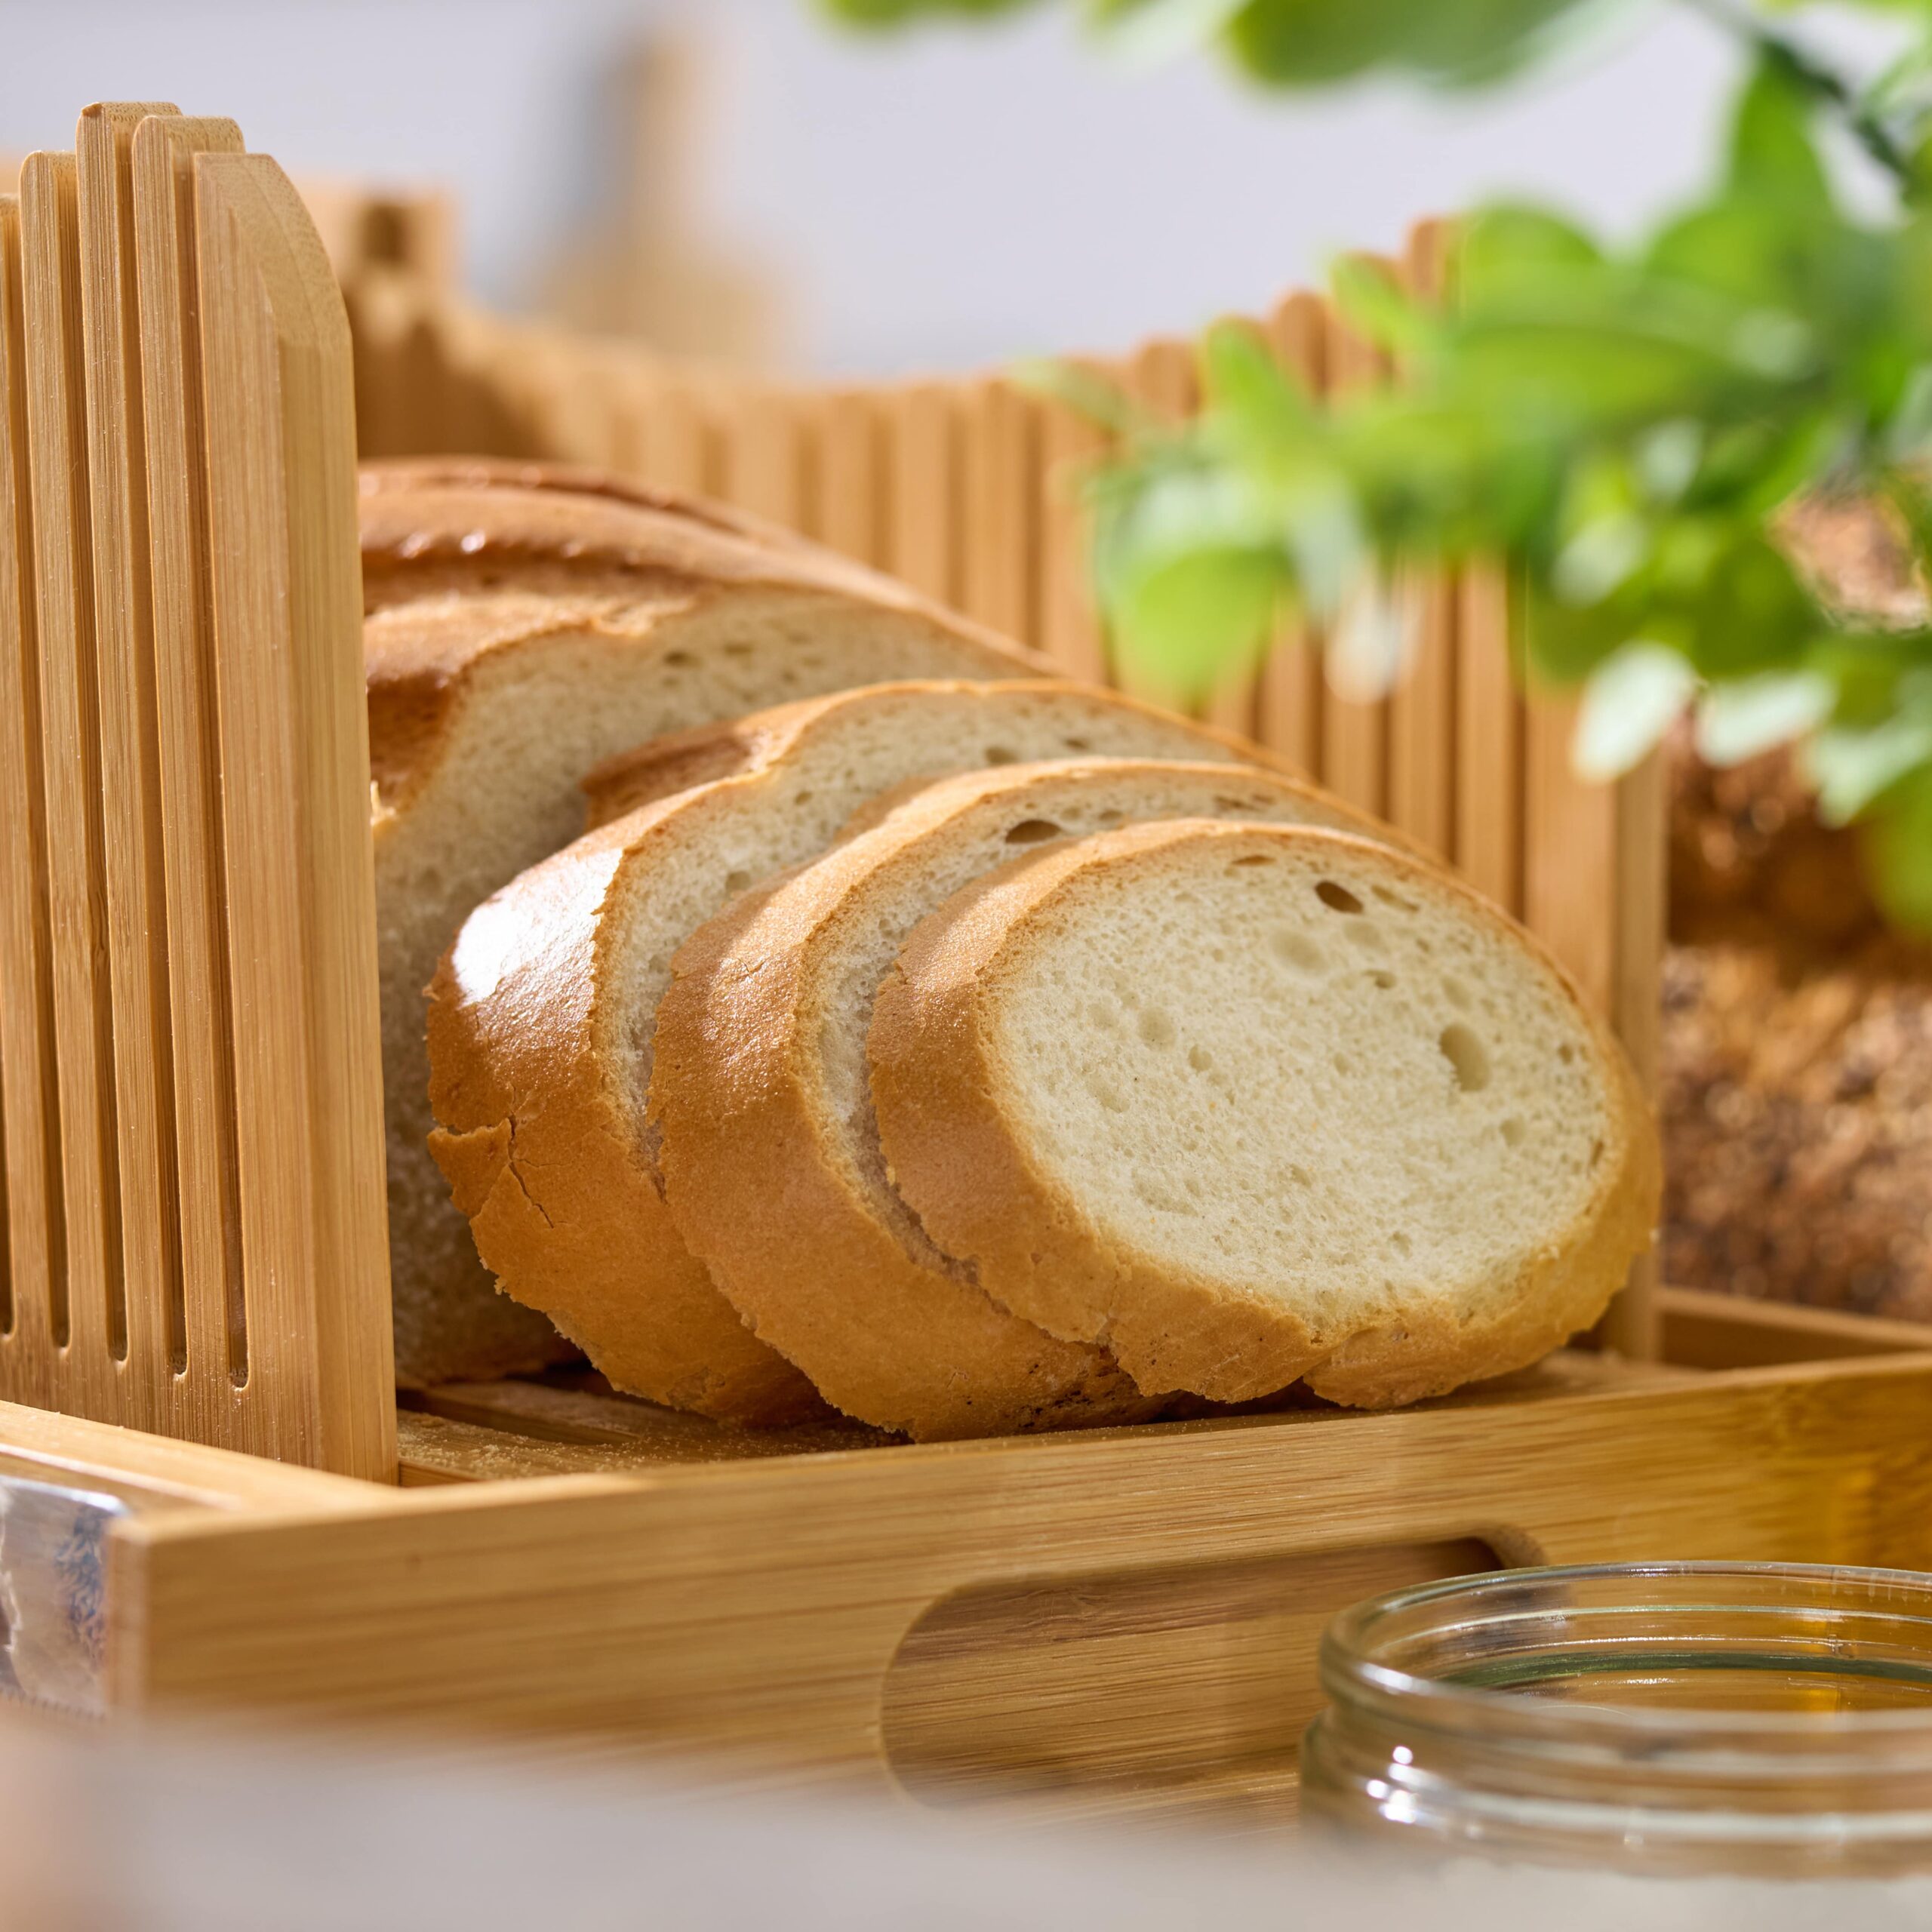 Professional Bamboo Bread Slicer